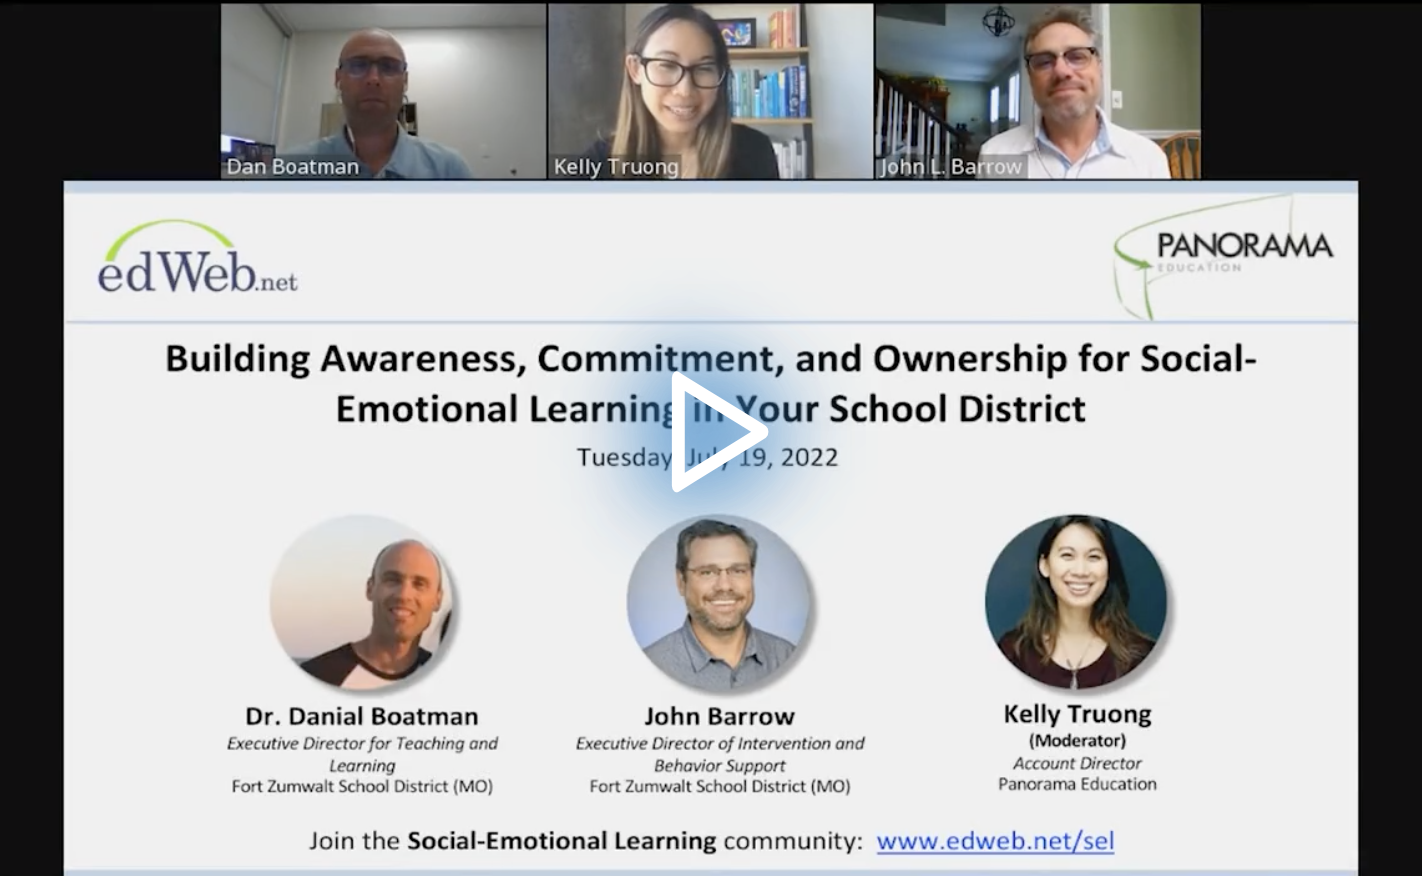 Building Awareness, Commitment, and Ownership for Social-Emotional Learning in Your School District edLeader Panel recording link